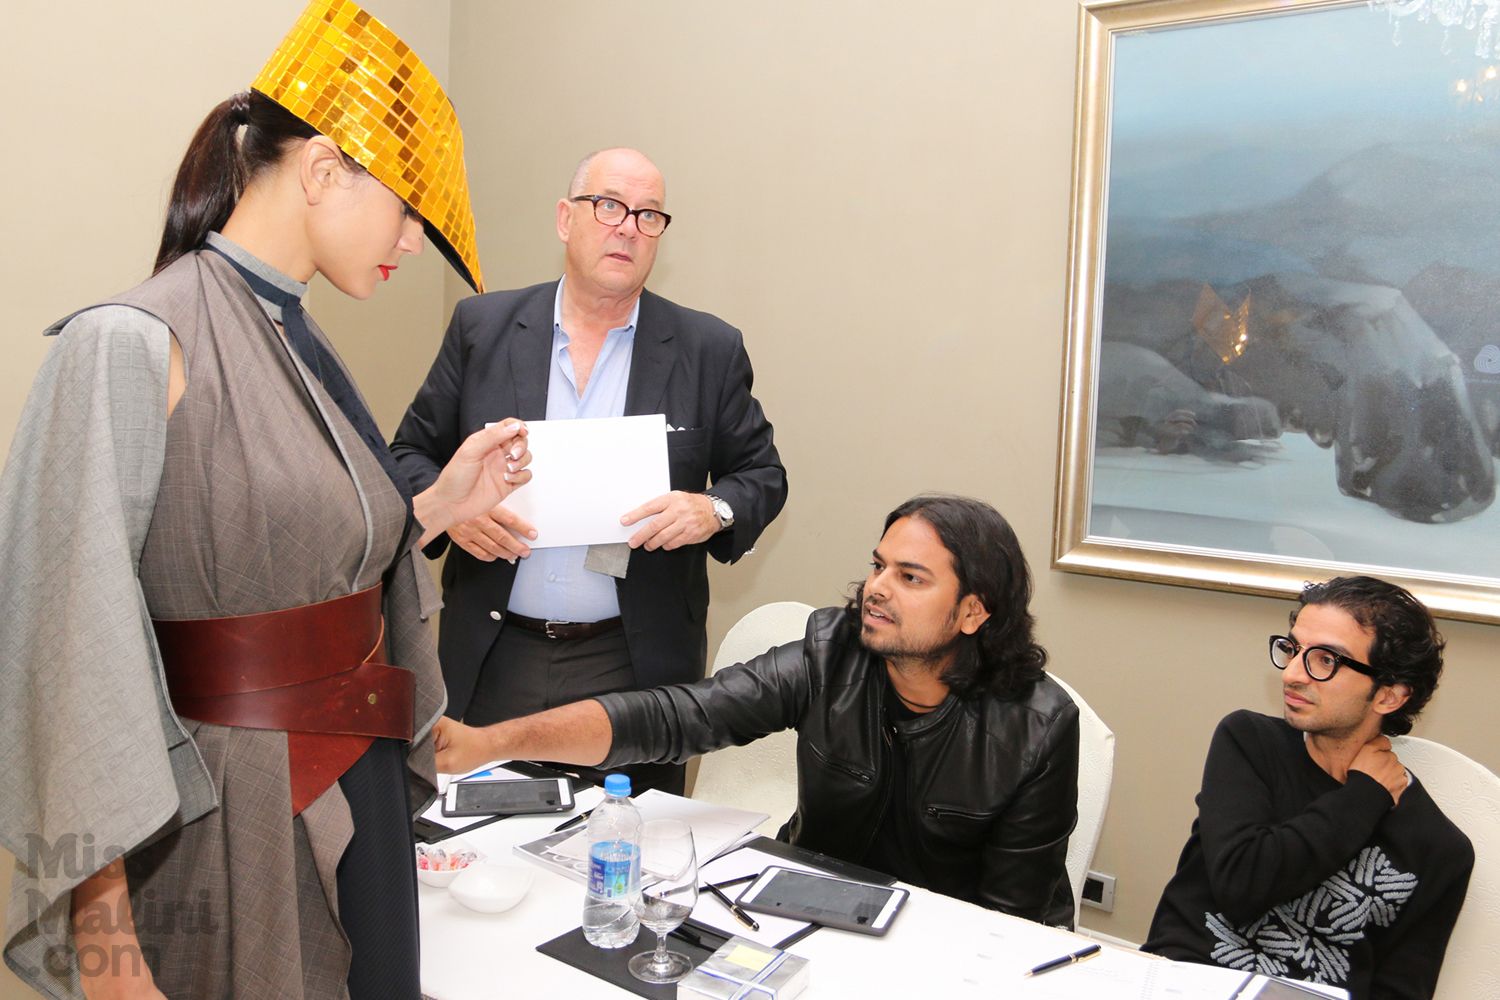 Rahul Mishra inspects a garment by Bird on a Wire with Imran Amed and Peter Ackroyd